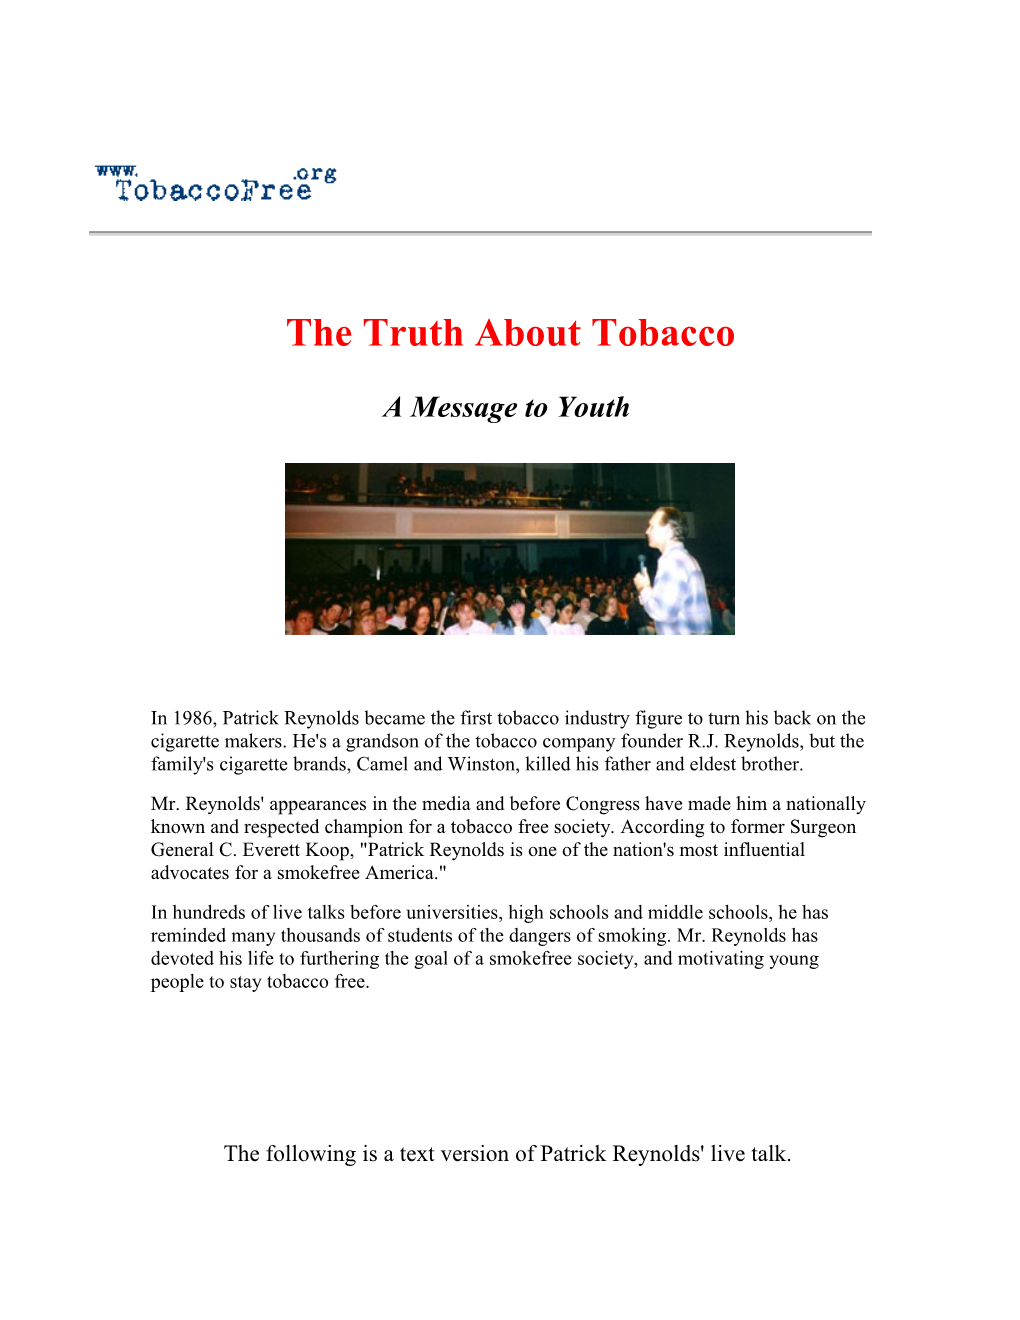 !Tobacco Prevention & Smoknig Education * a Super Talk for Teens and Youth!